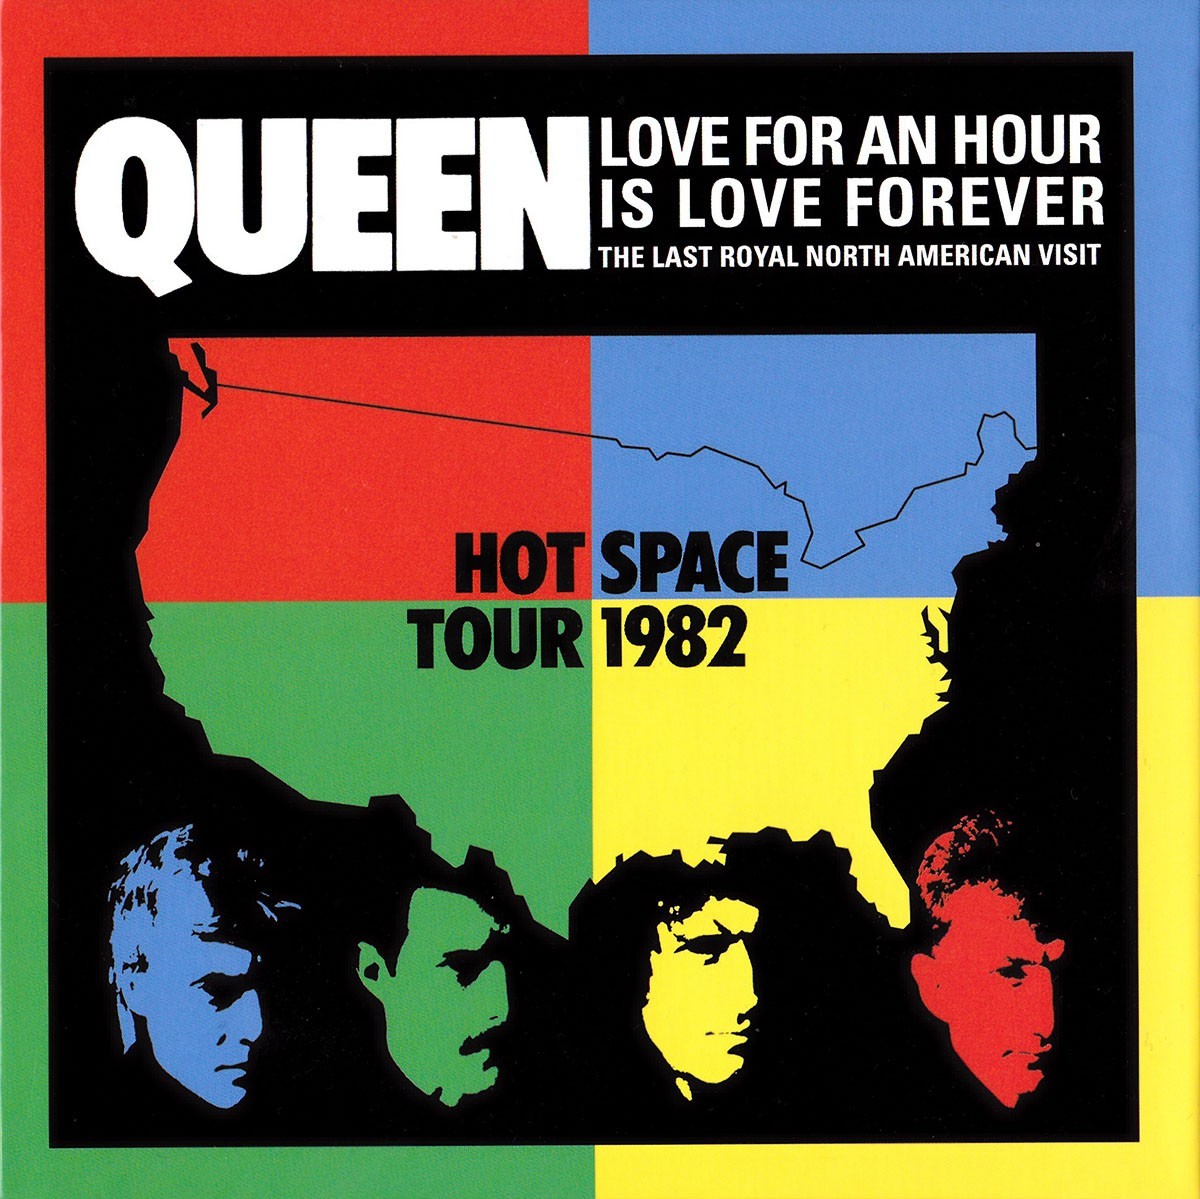 Cover of Queen Hot space Tour 1982